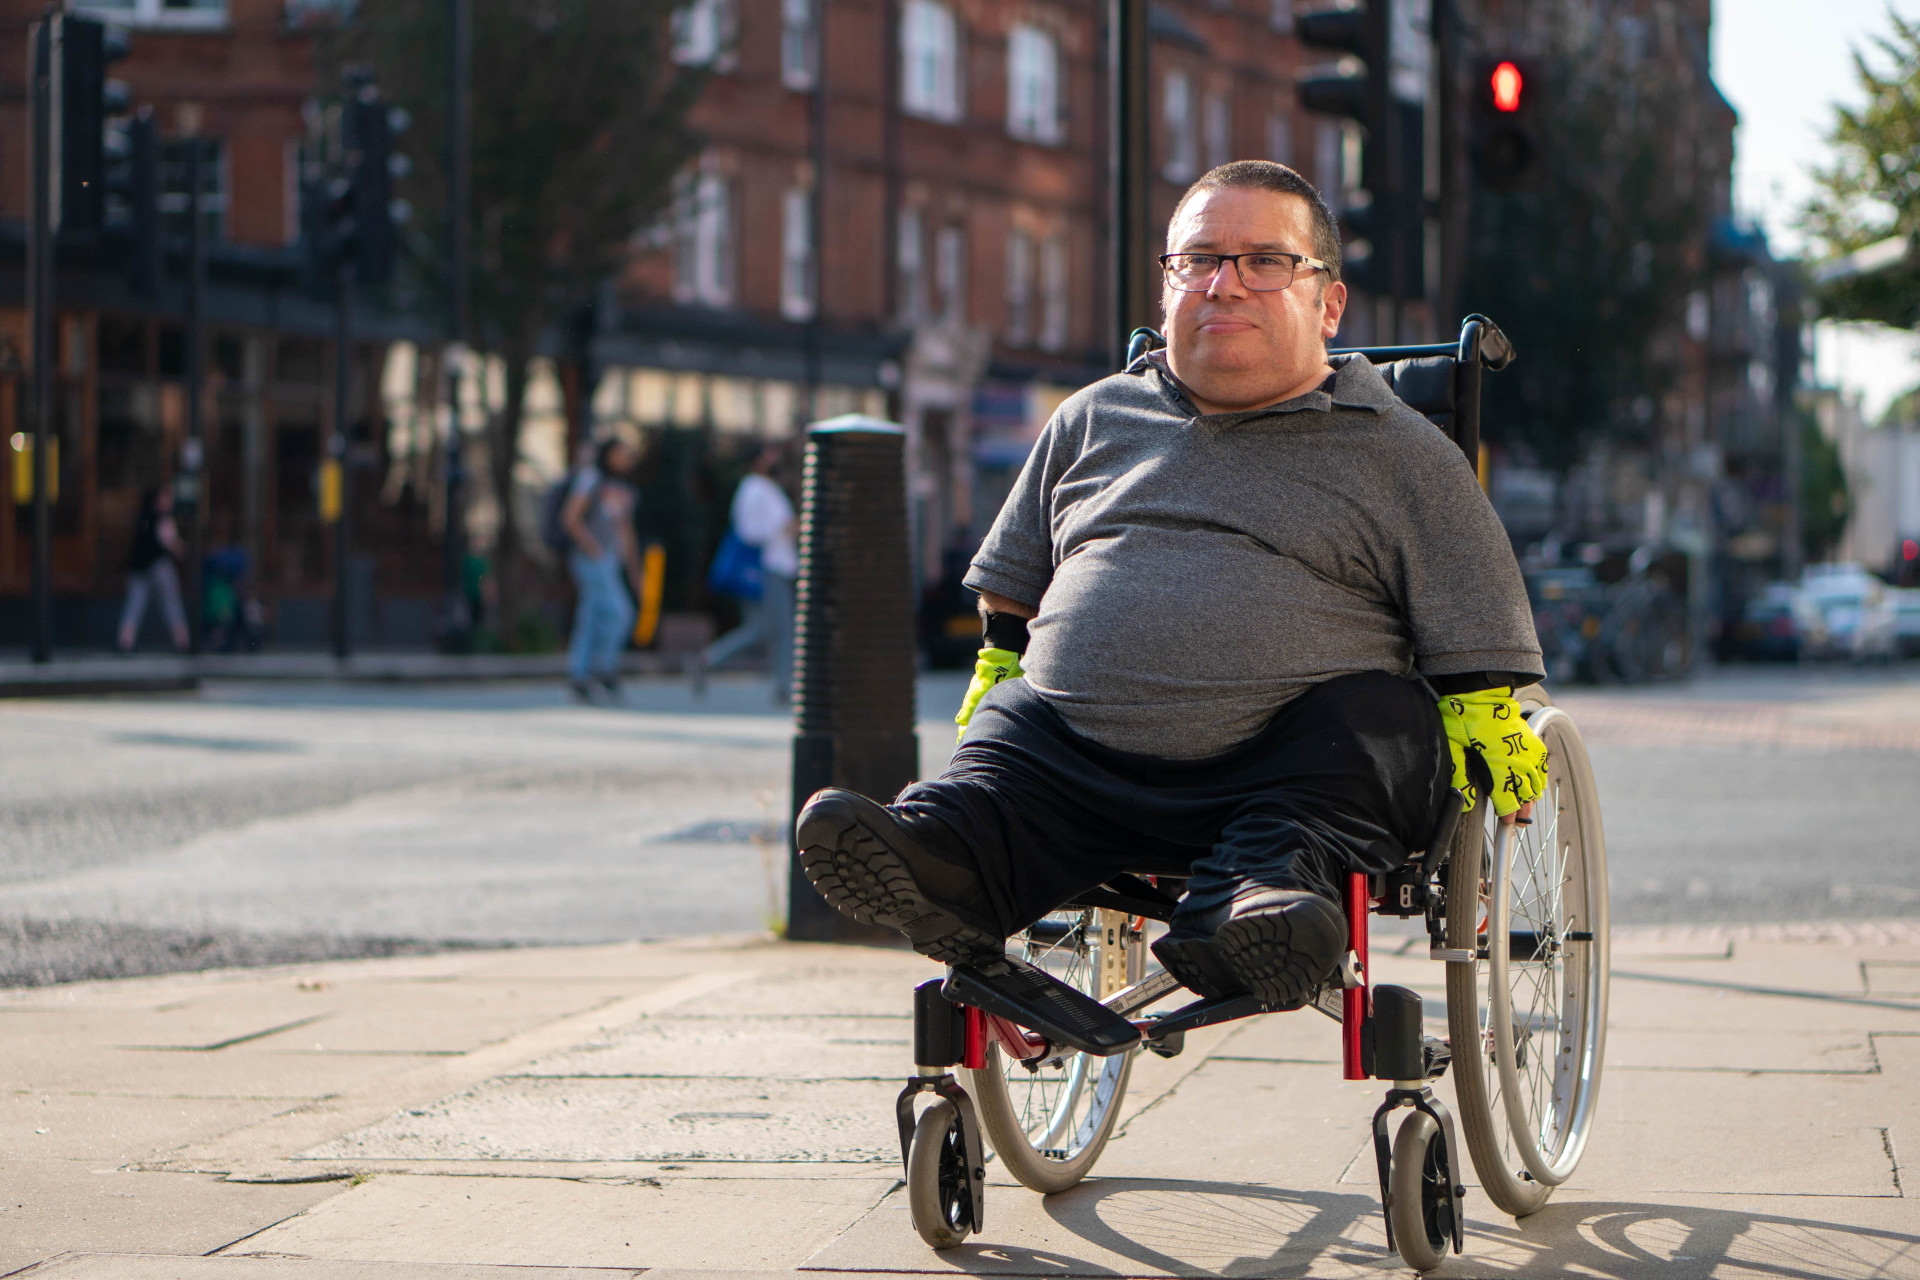 A man in a wheelchair in the streets